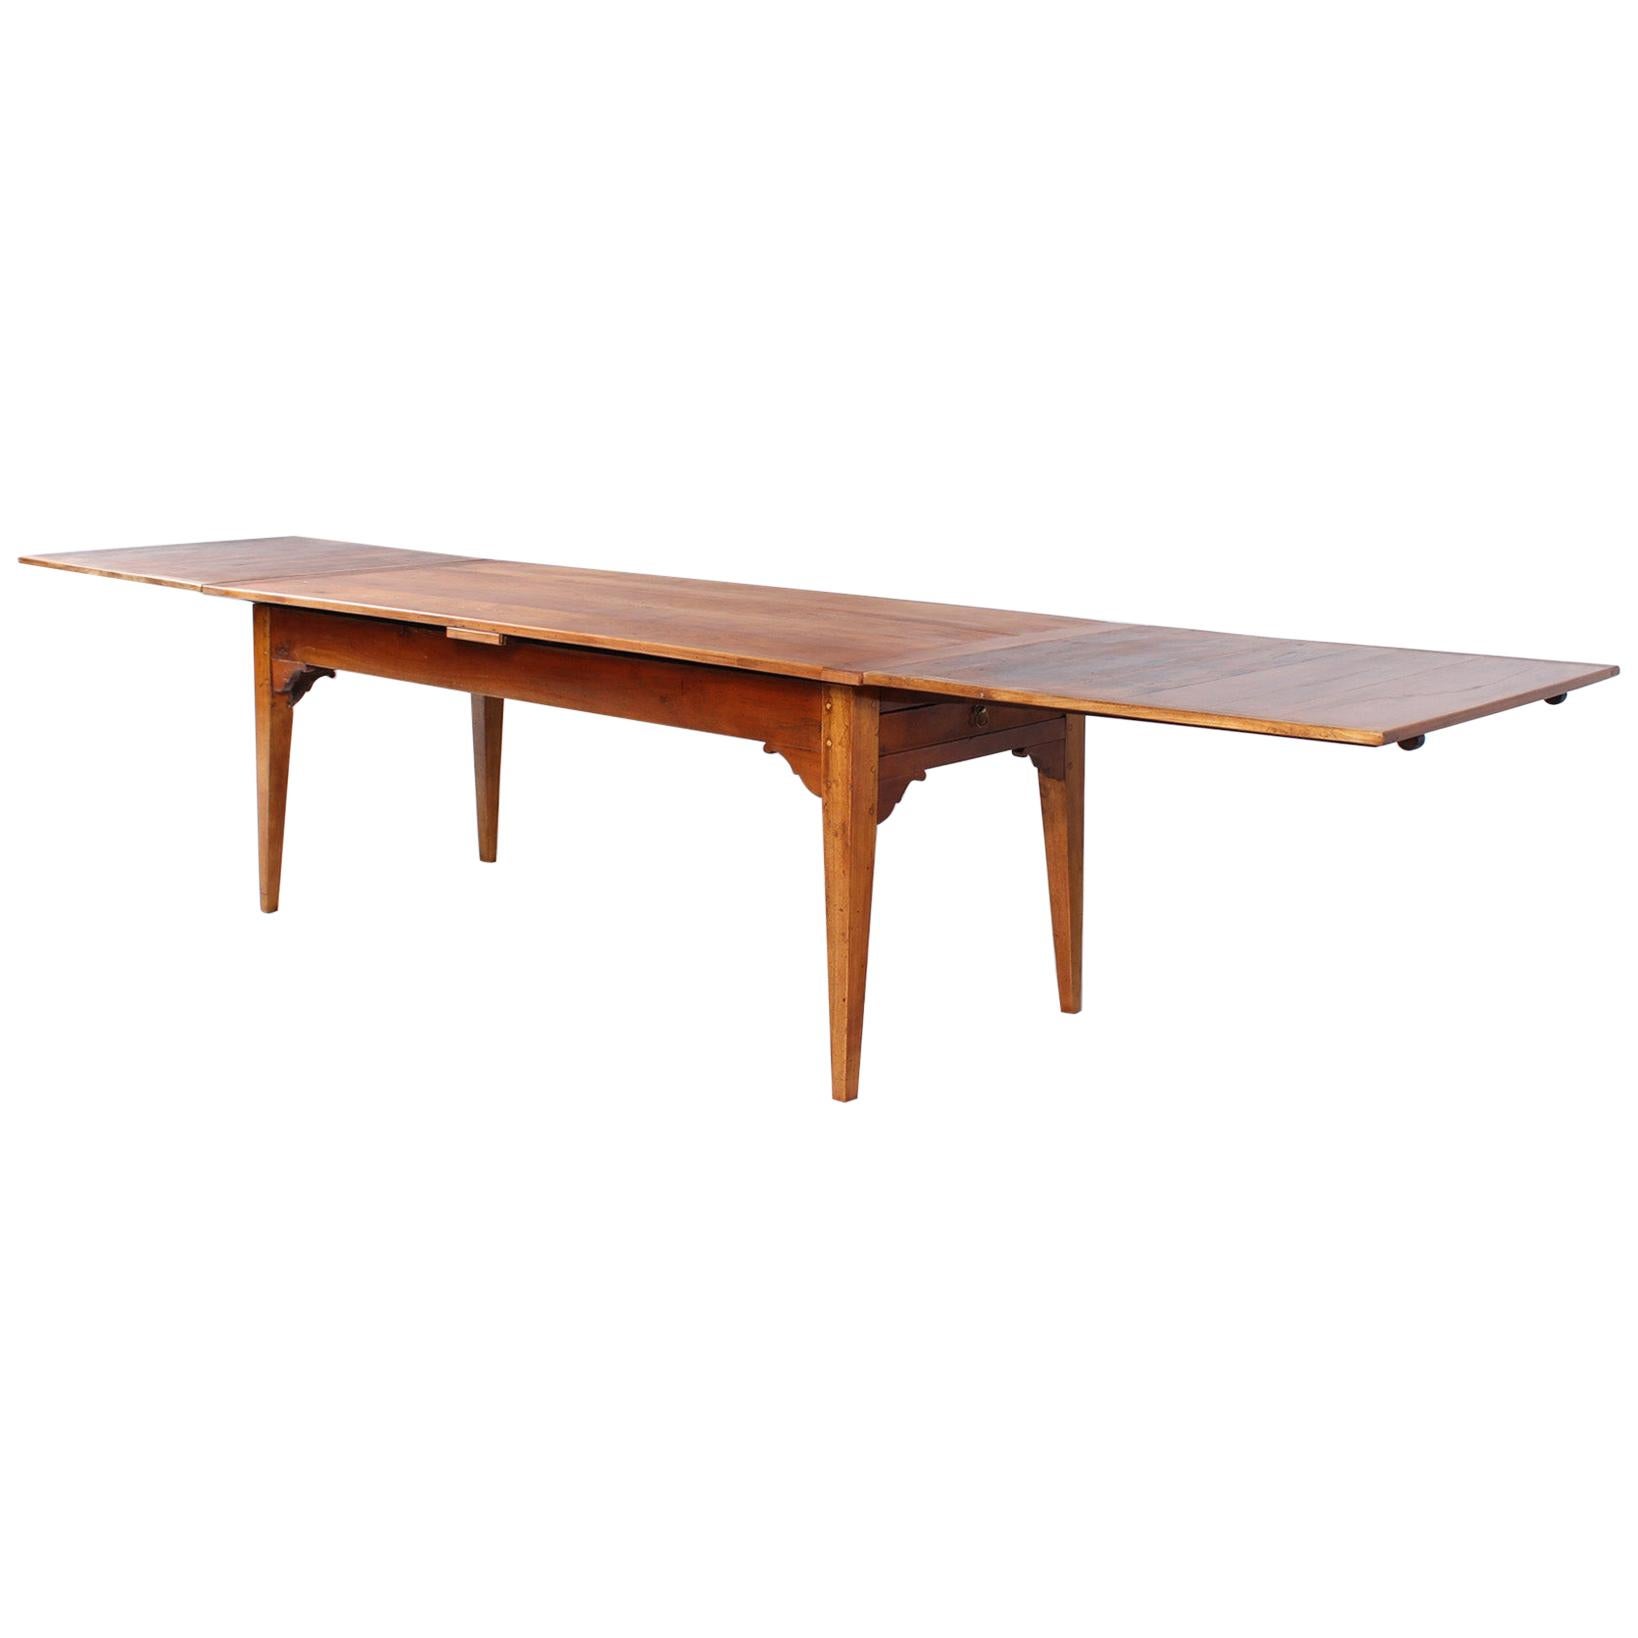 19th Century Extendable Farm Table, for up to 12 people, Cherrywood